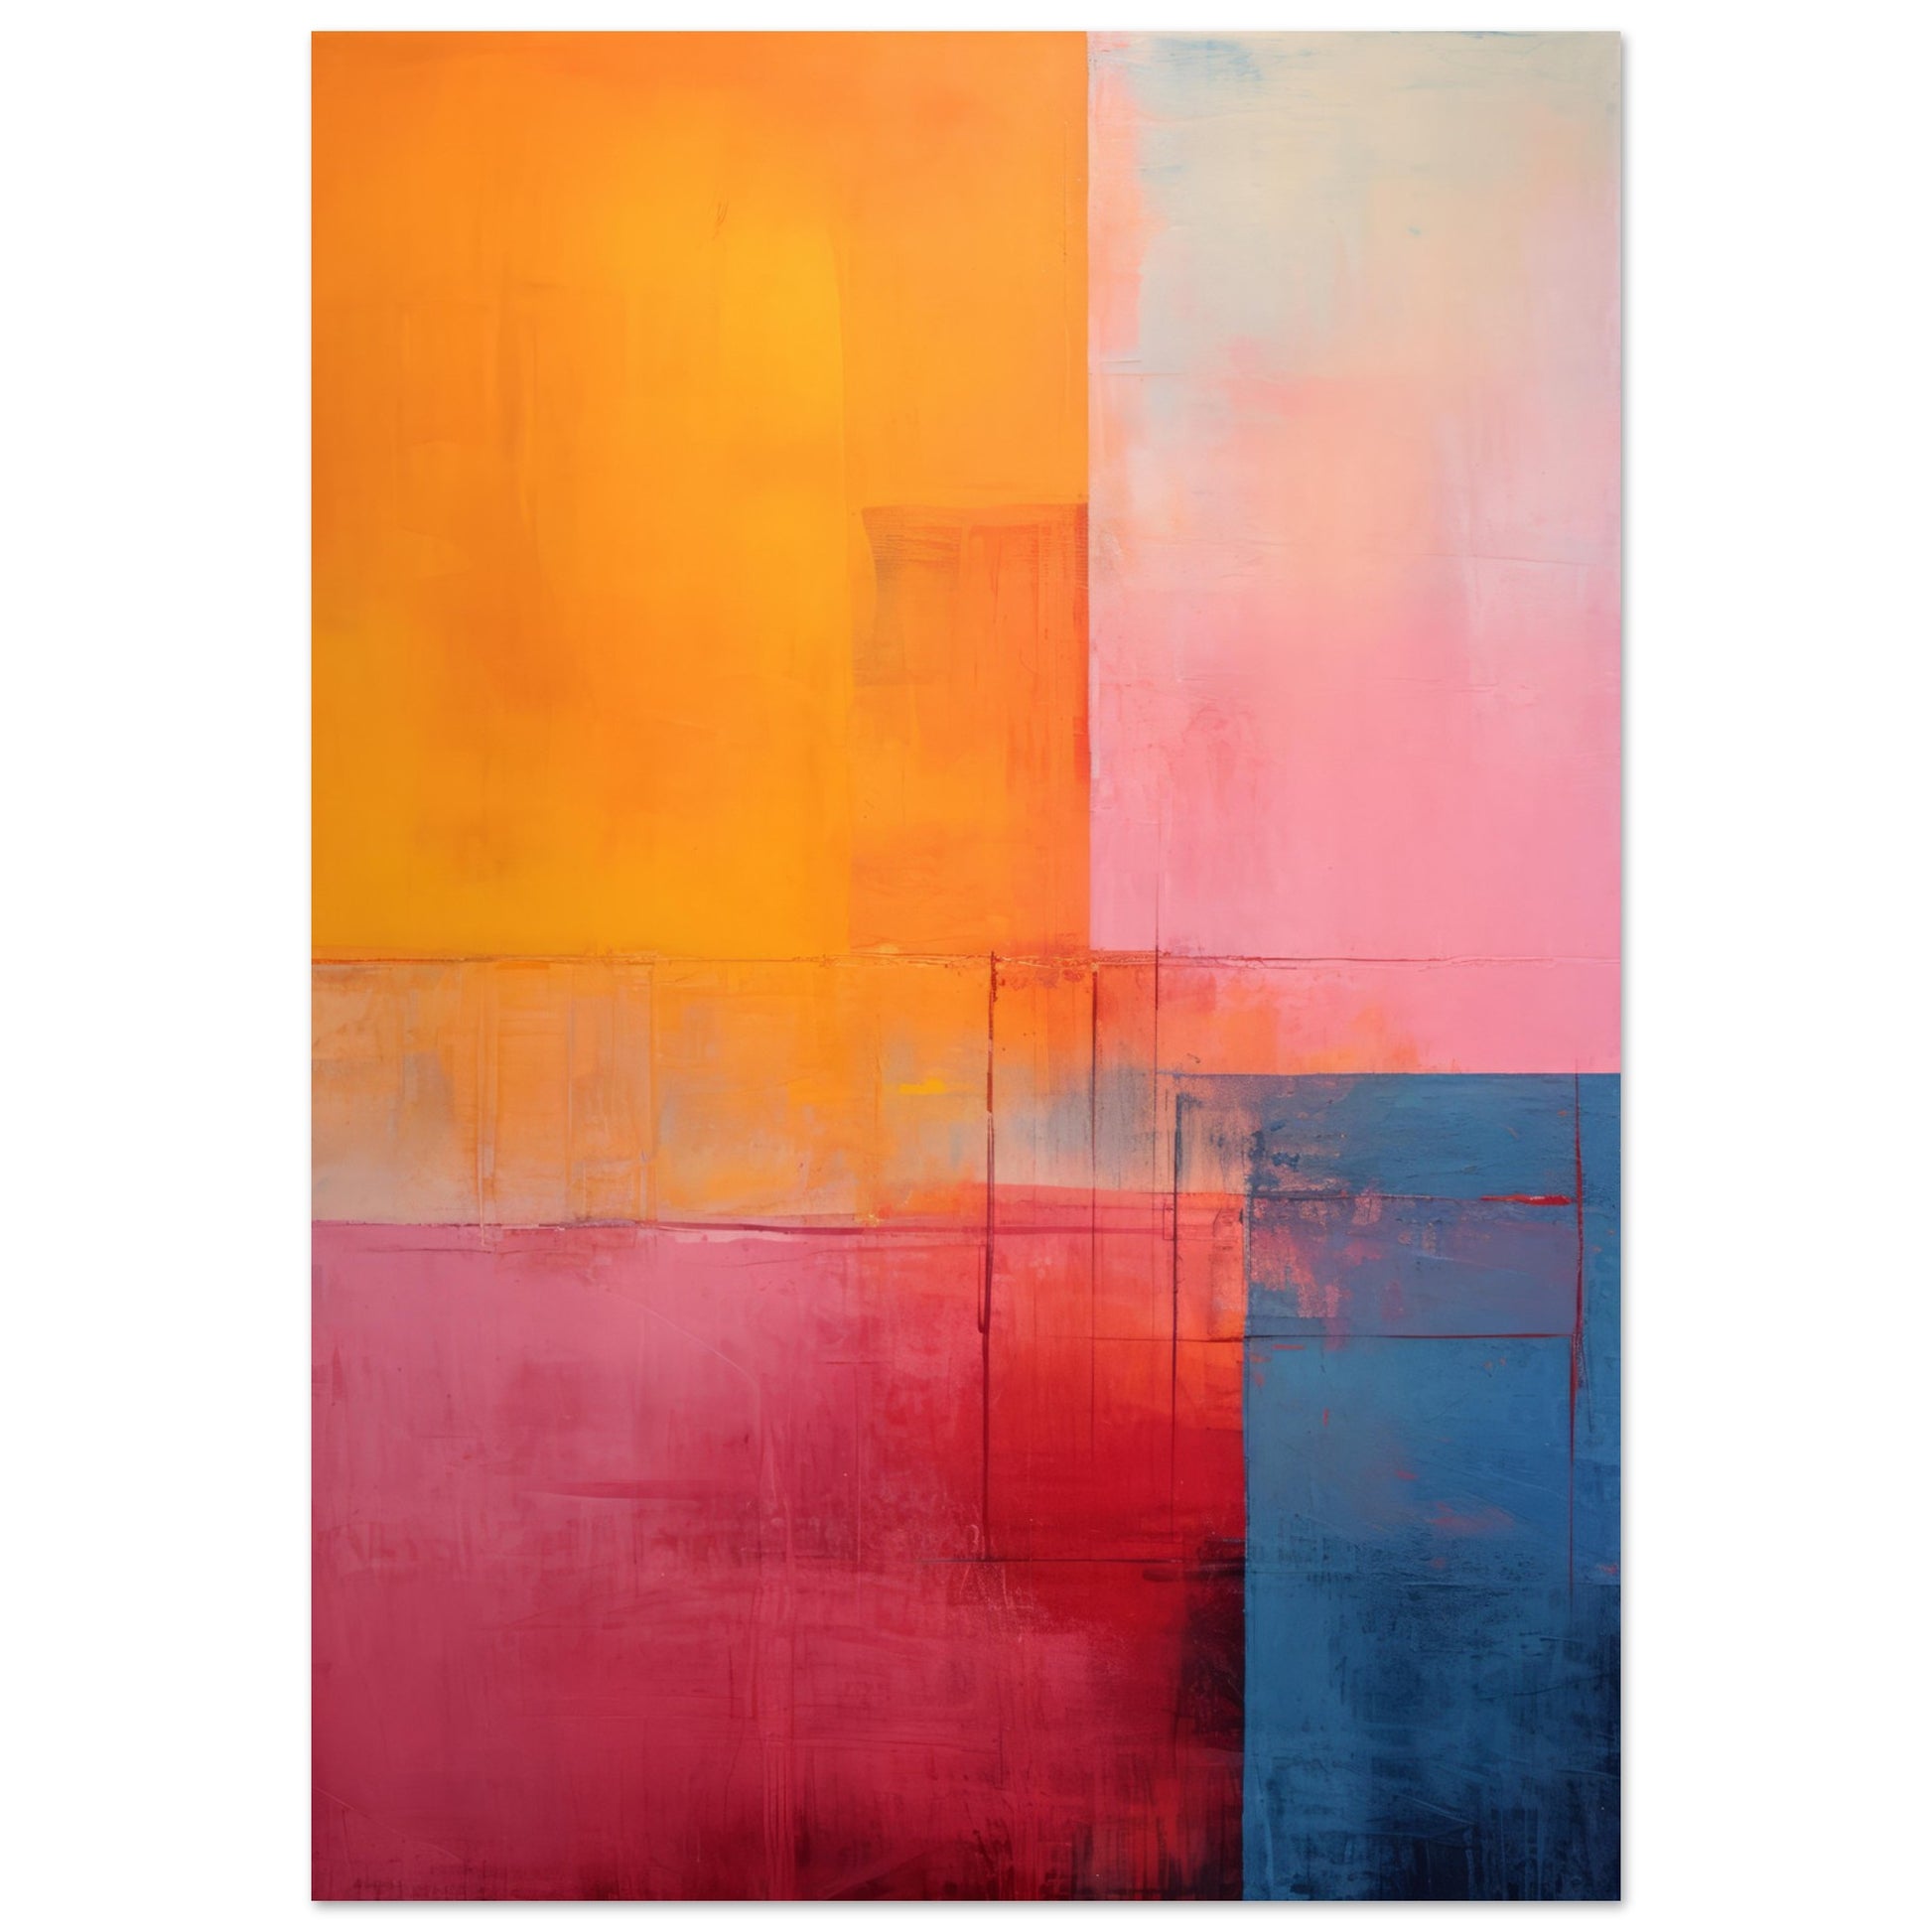 Modern abstract art print "Completed" with a blend of warm red and orange and cool blue, pink white tones in a structured composition.